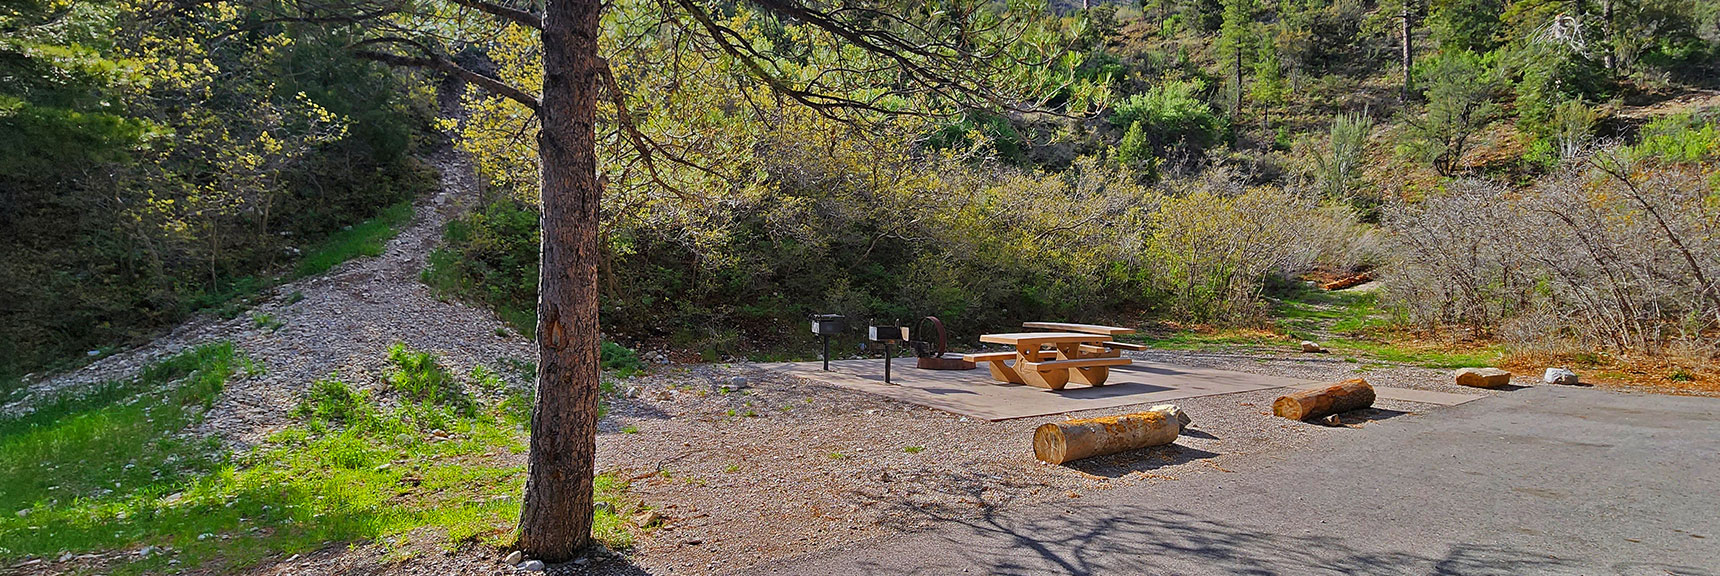 At Base of The Kyle Canyon Picnic Area. Potential Access Pathway to Harris Mountain | Acastus Trail | Mt Charleston Wilderness | Spring Mountains, Nevada